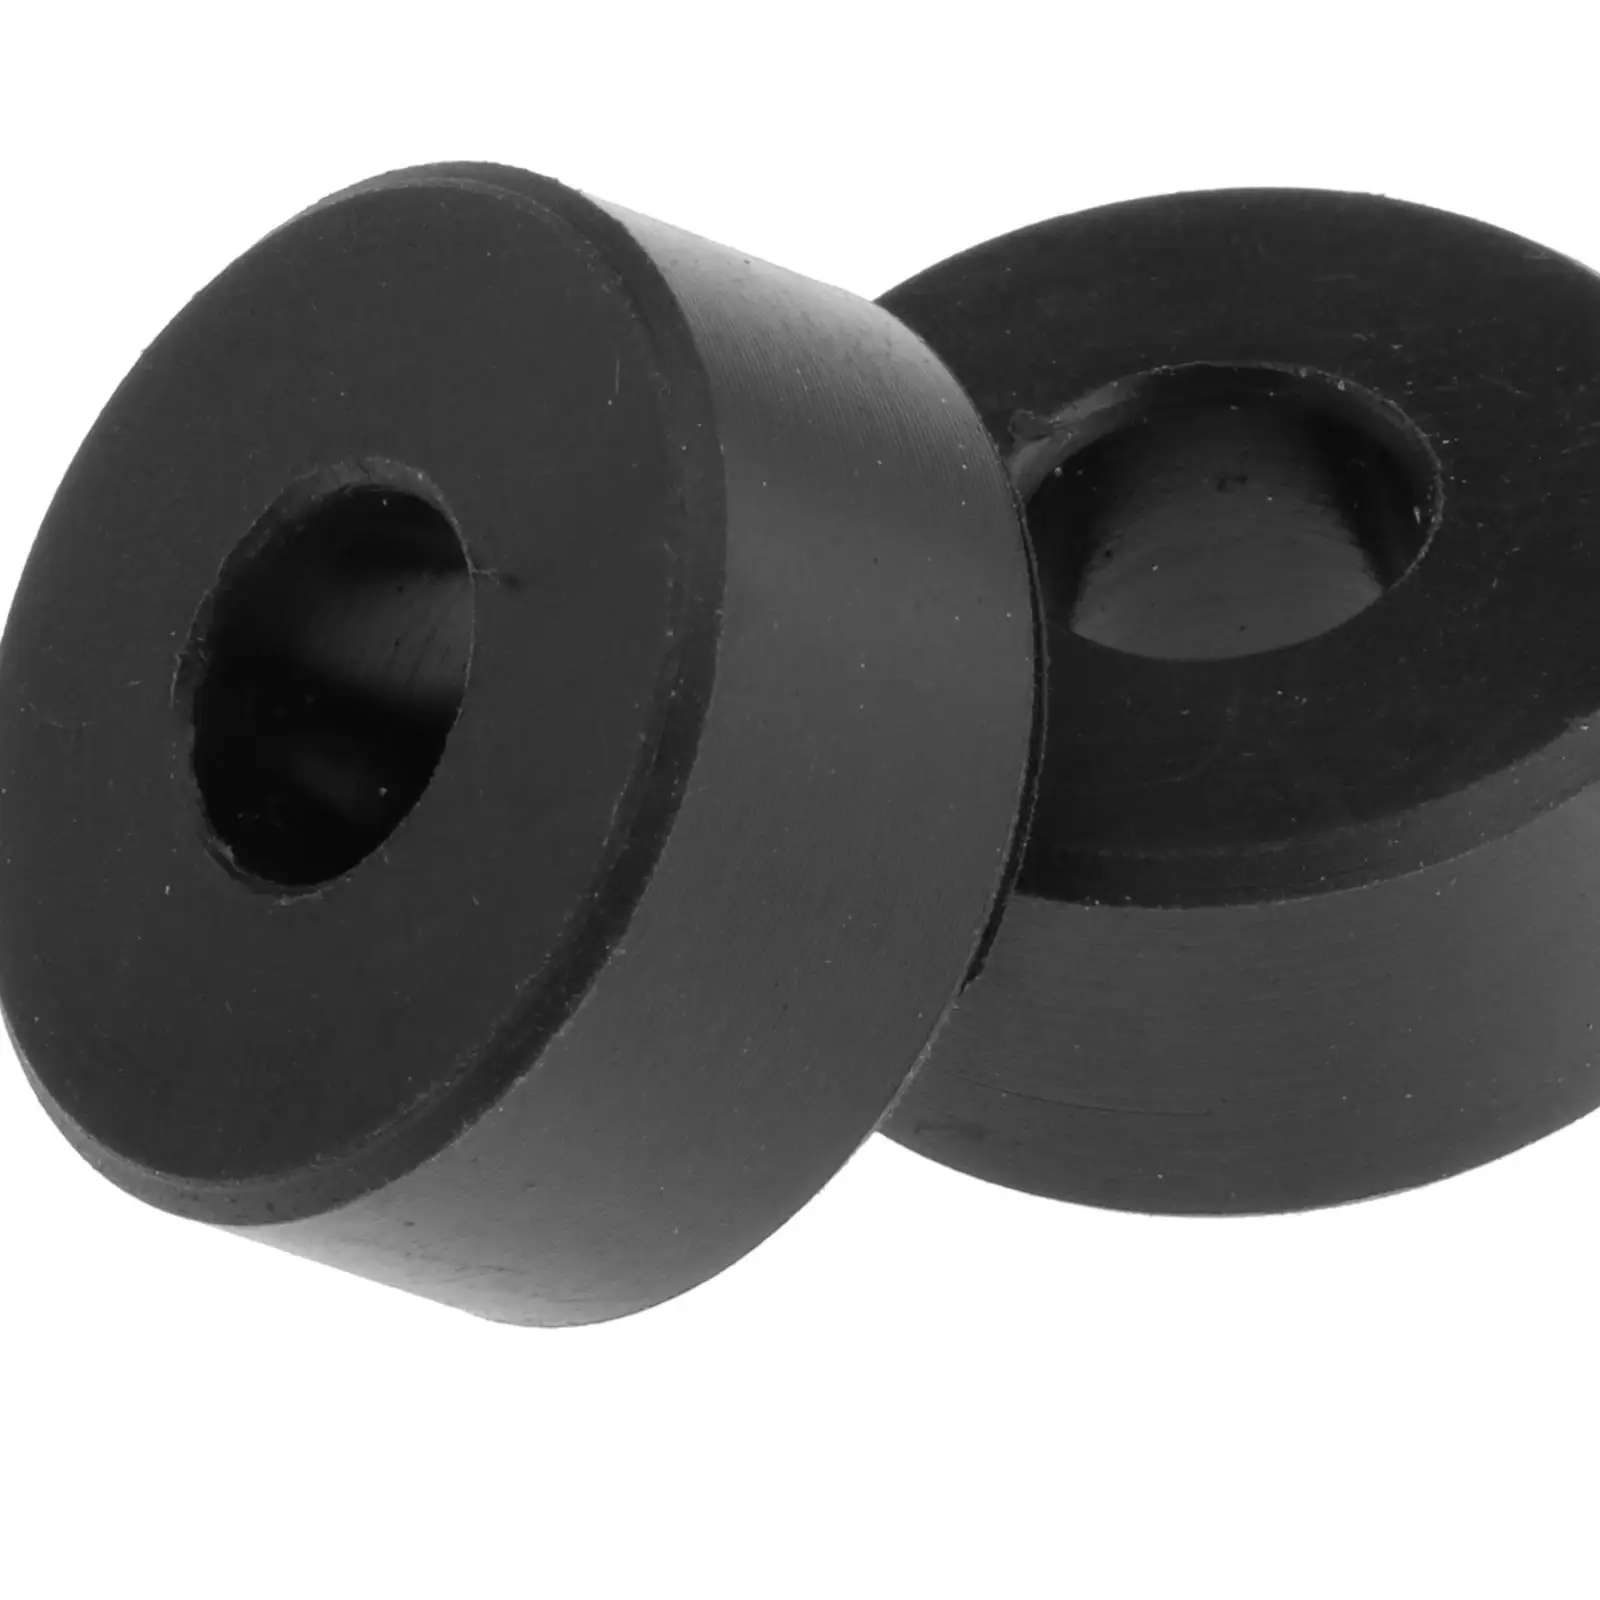 1 Pair Secondary Clutch Rollers for   70,900,325,500,900  -Size Is Approximately 1 